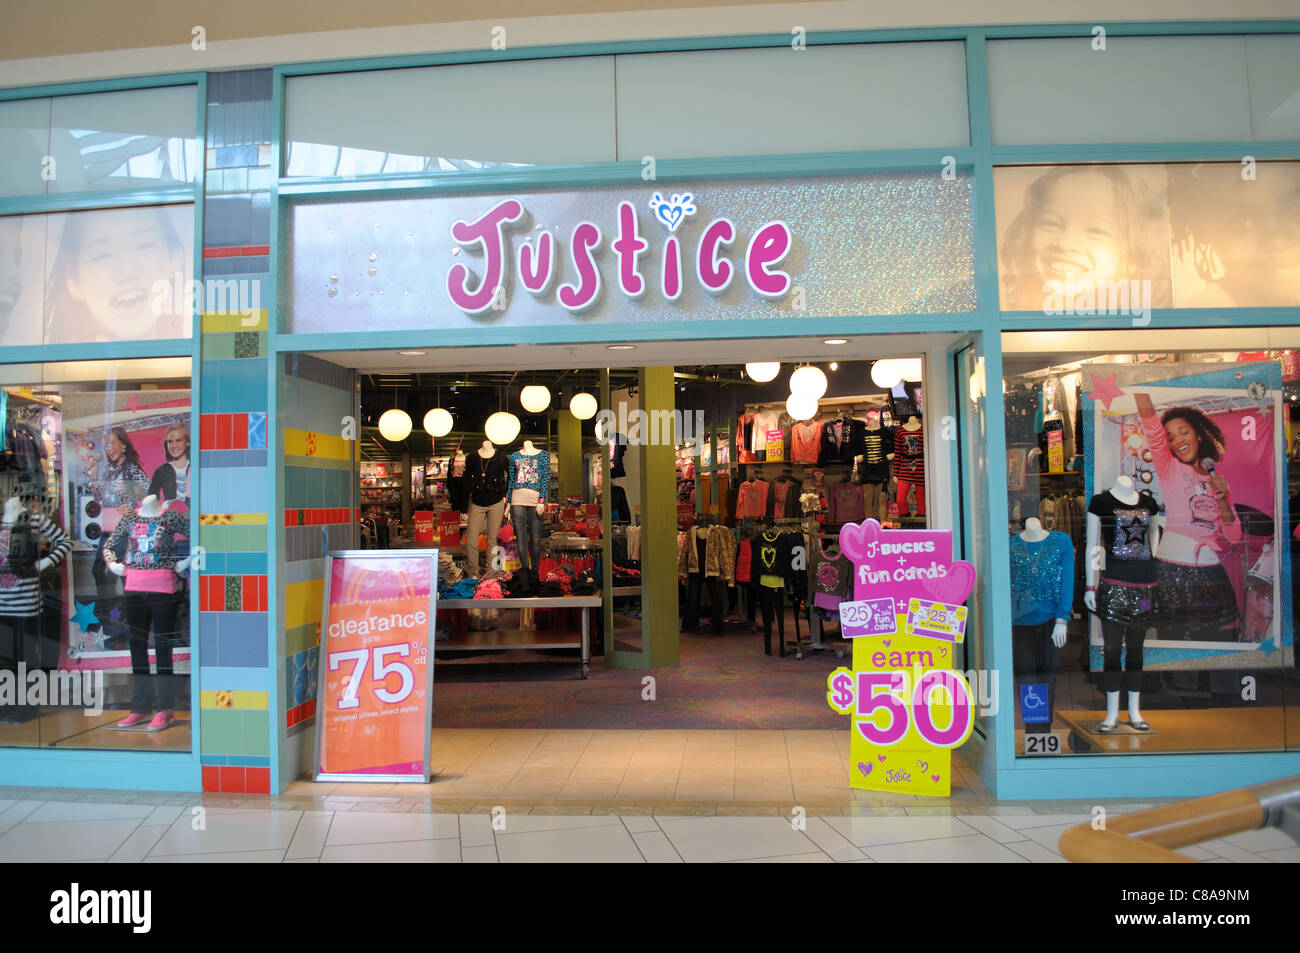 Justice, Girl Clothes, Justice Stores